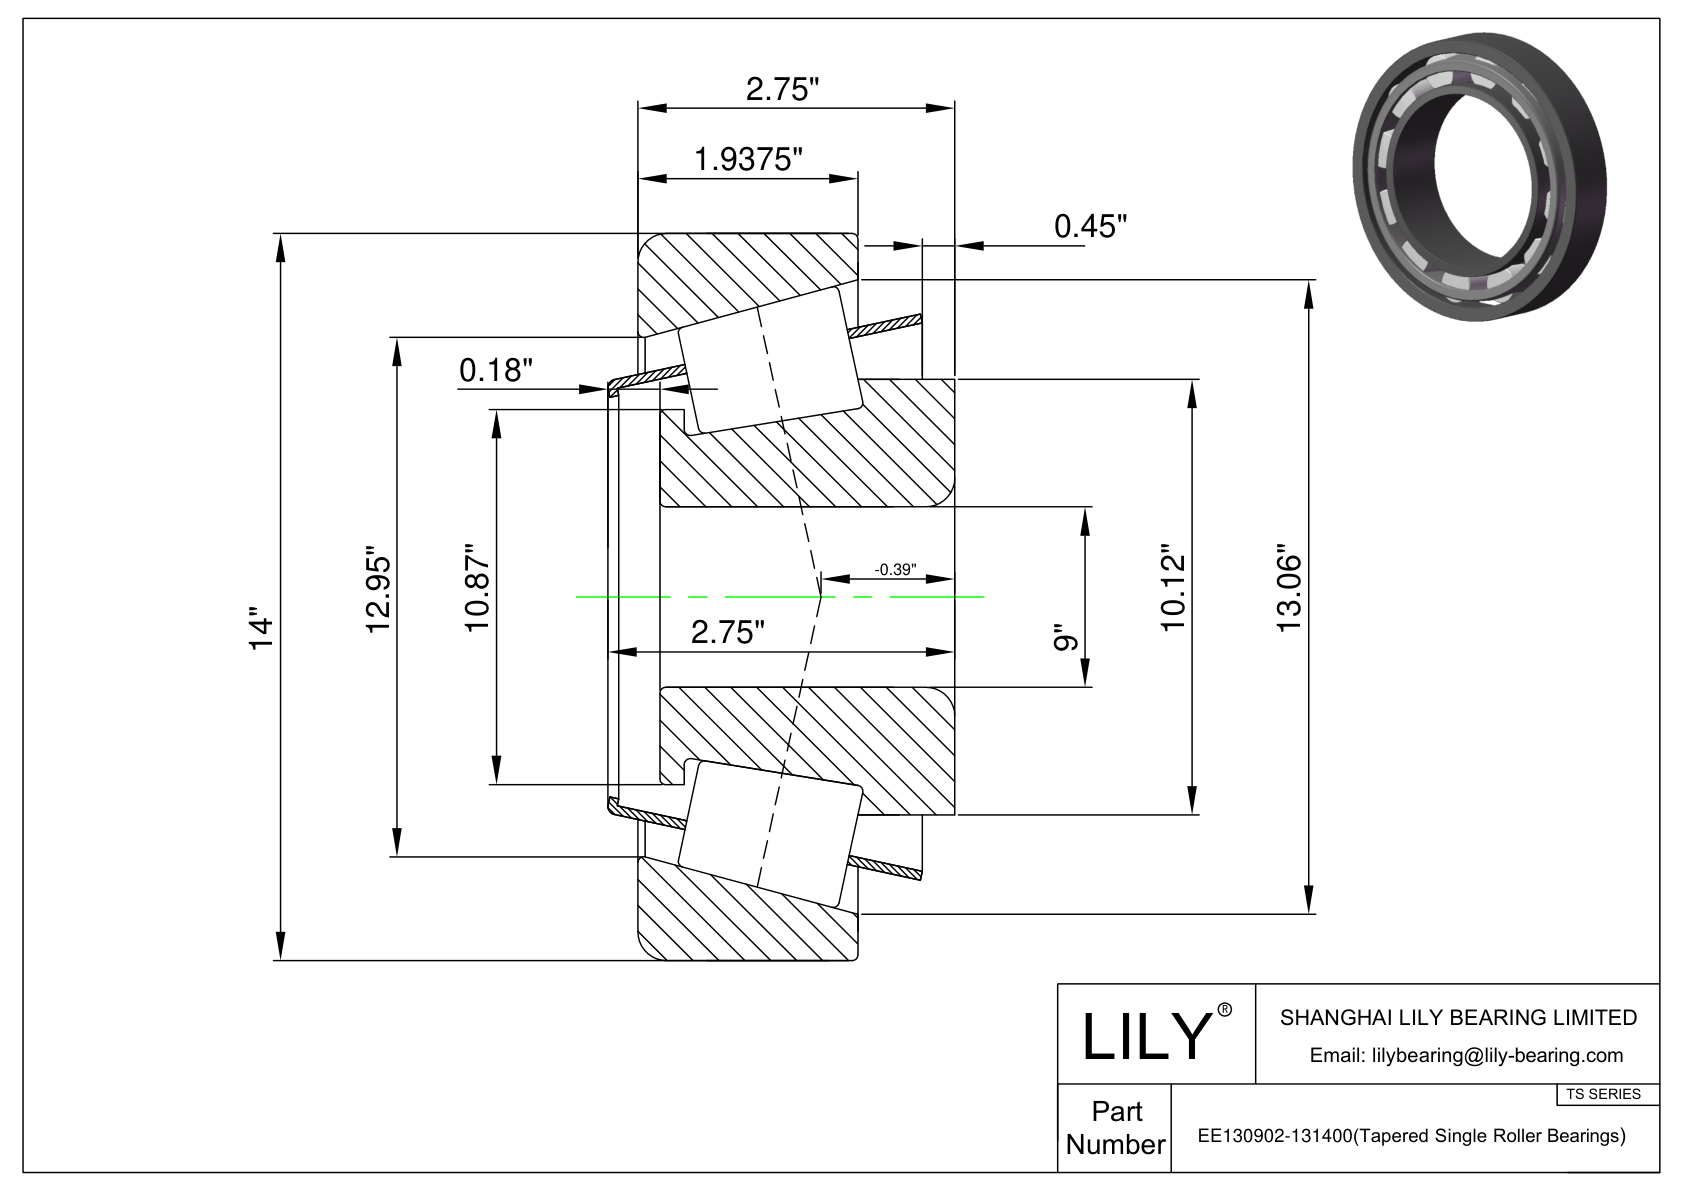 EE130902-131400 TS (Tapered Single Roller Bearings) (Imperial) cad drawing